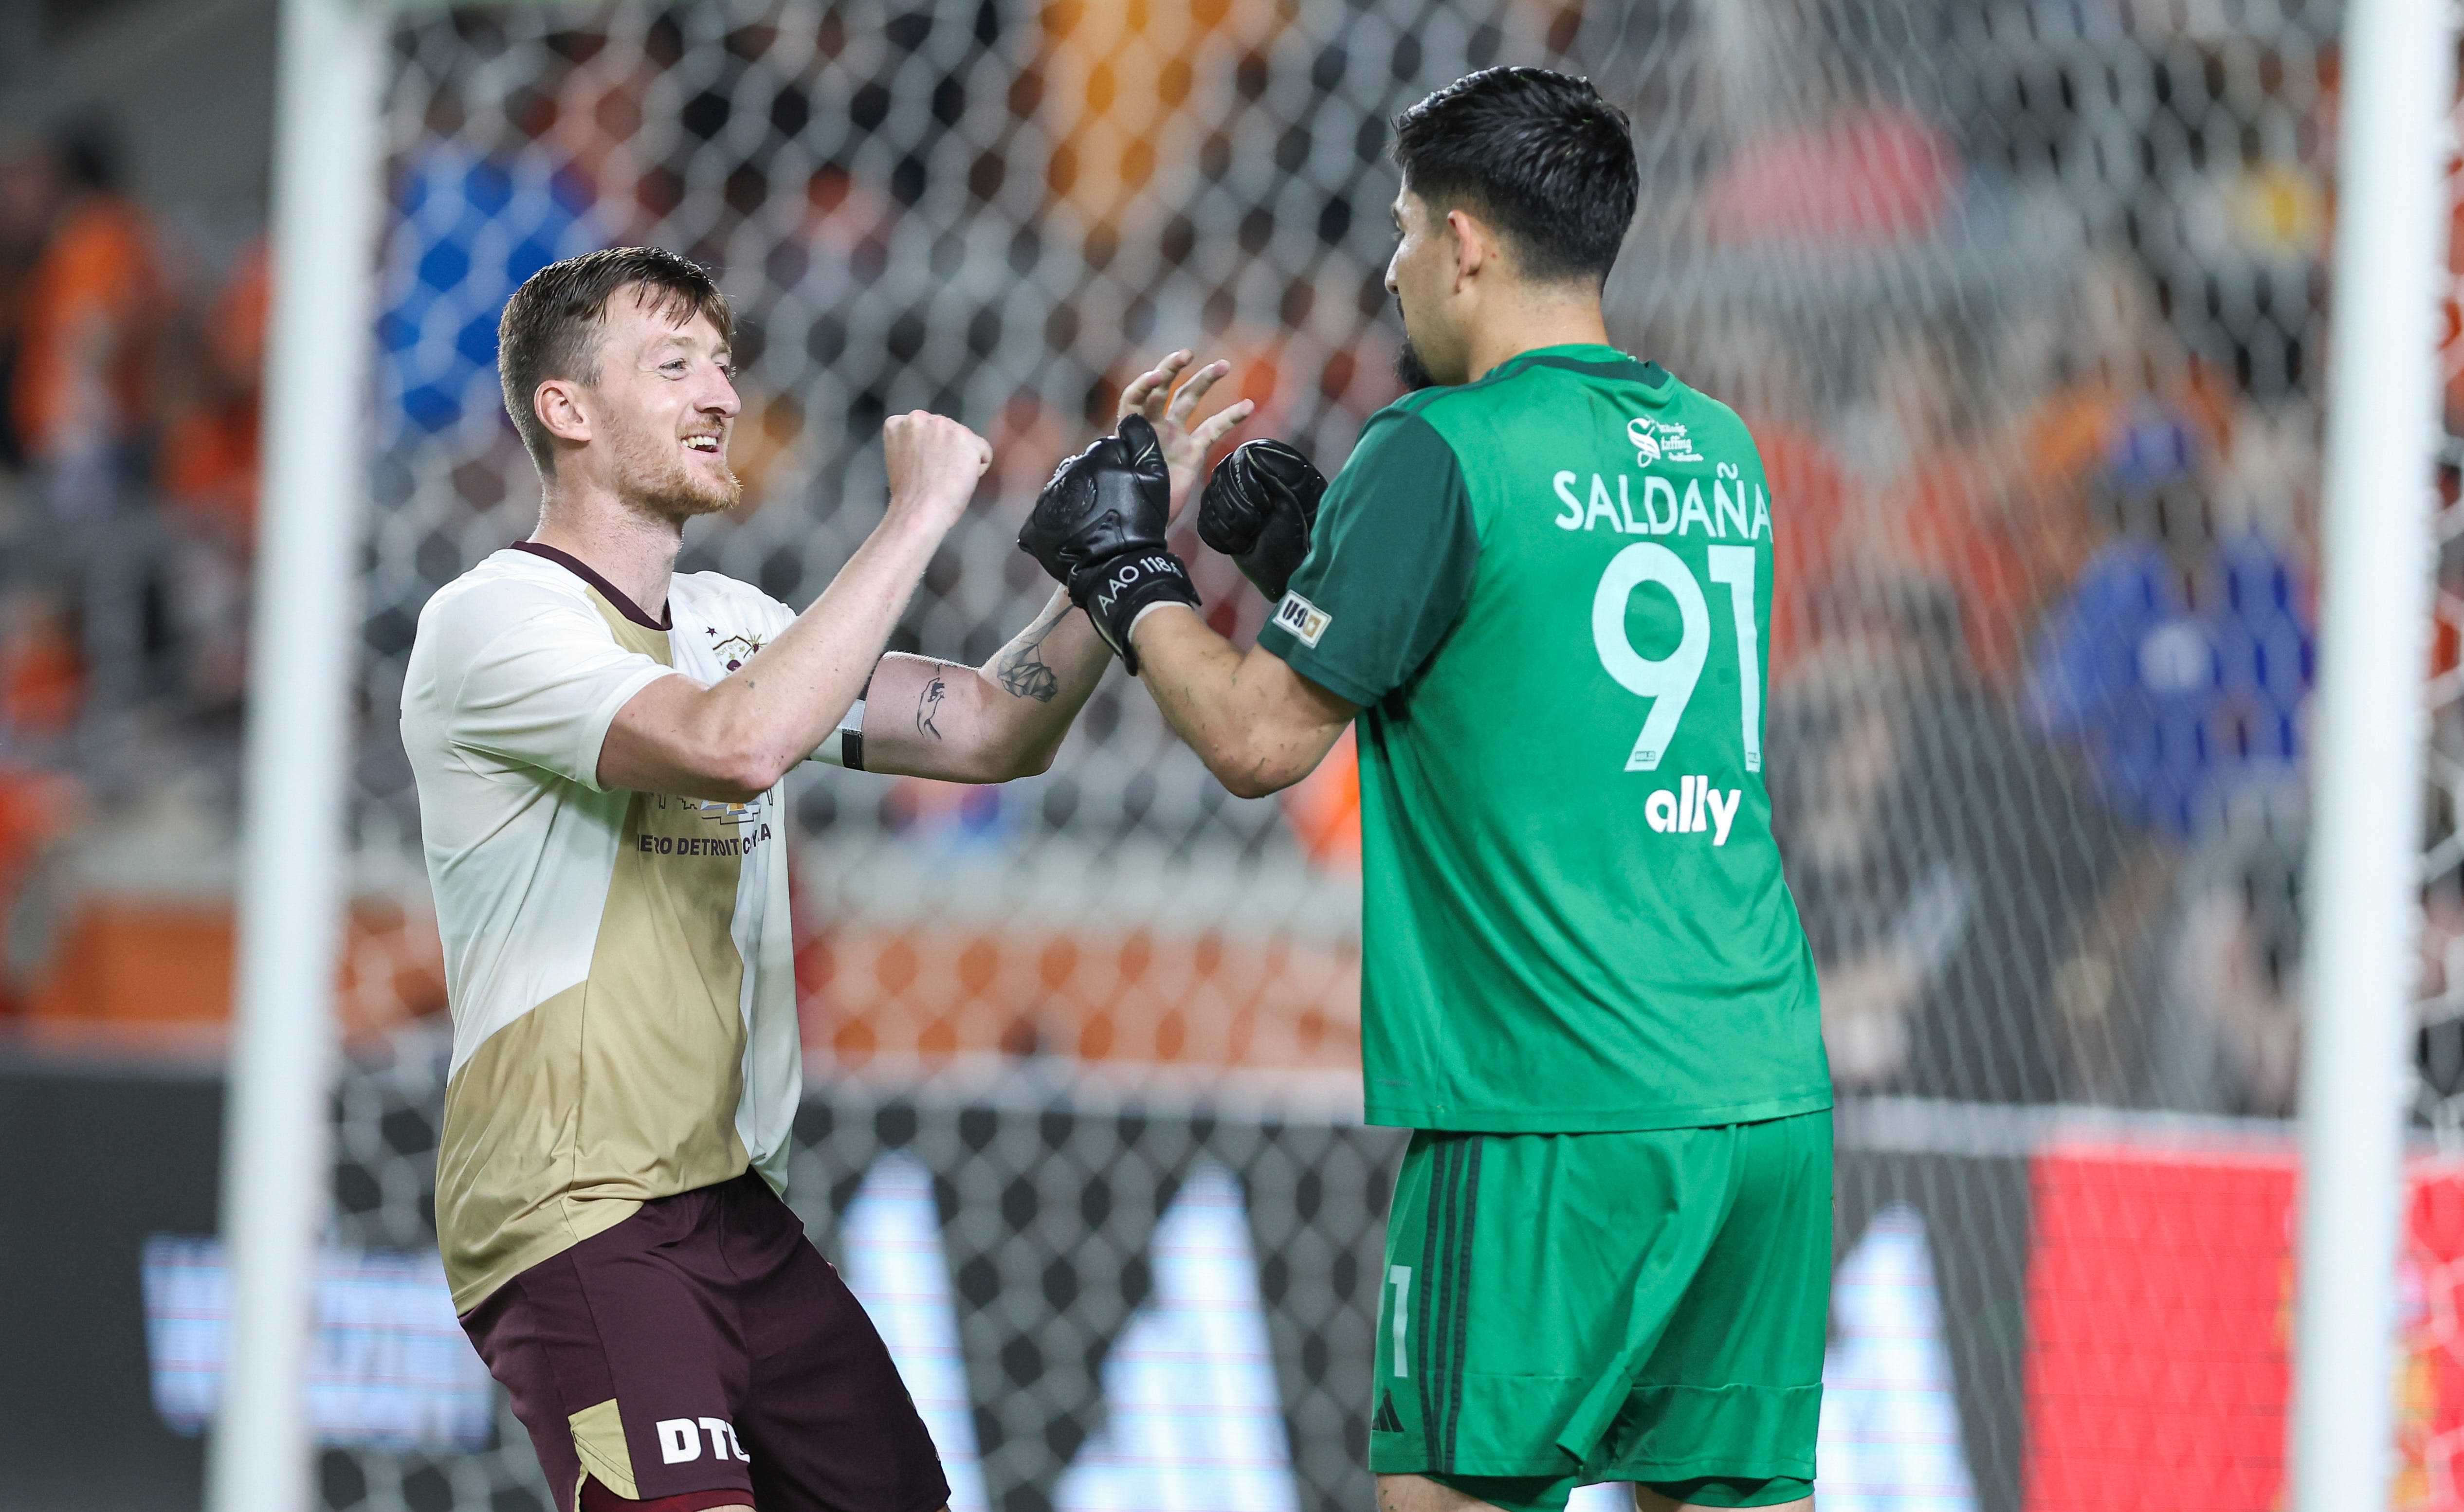 Detroit City FC's upset win in US Open Cup sets social media ablaze with celebration